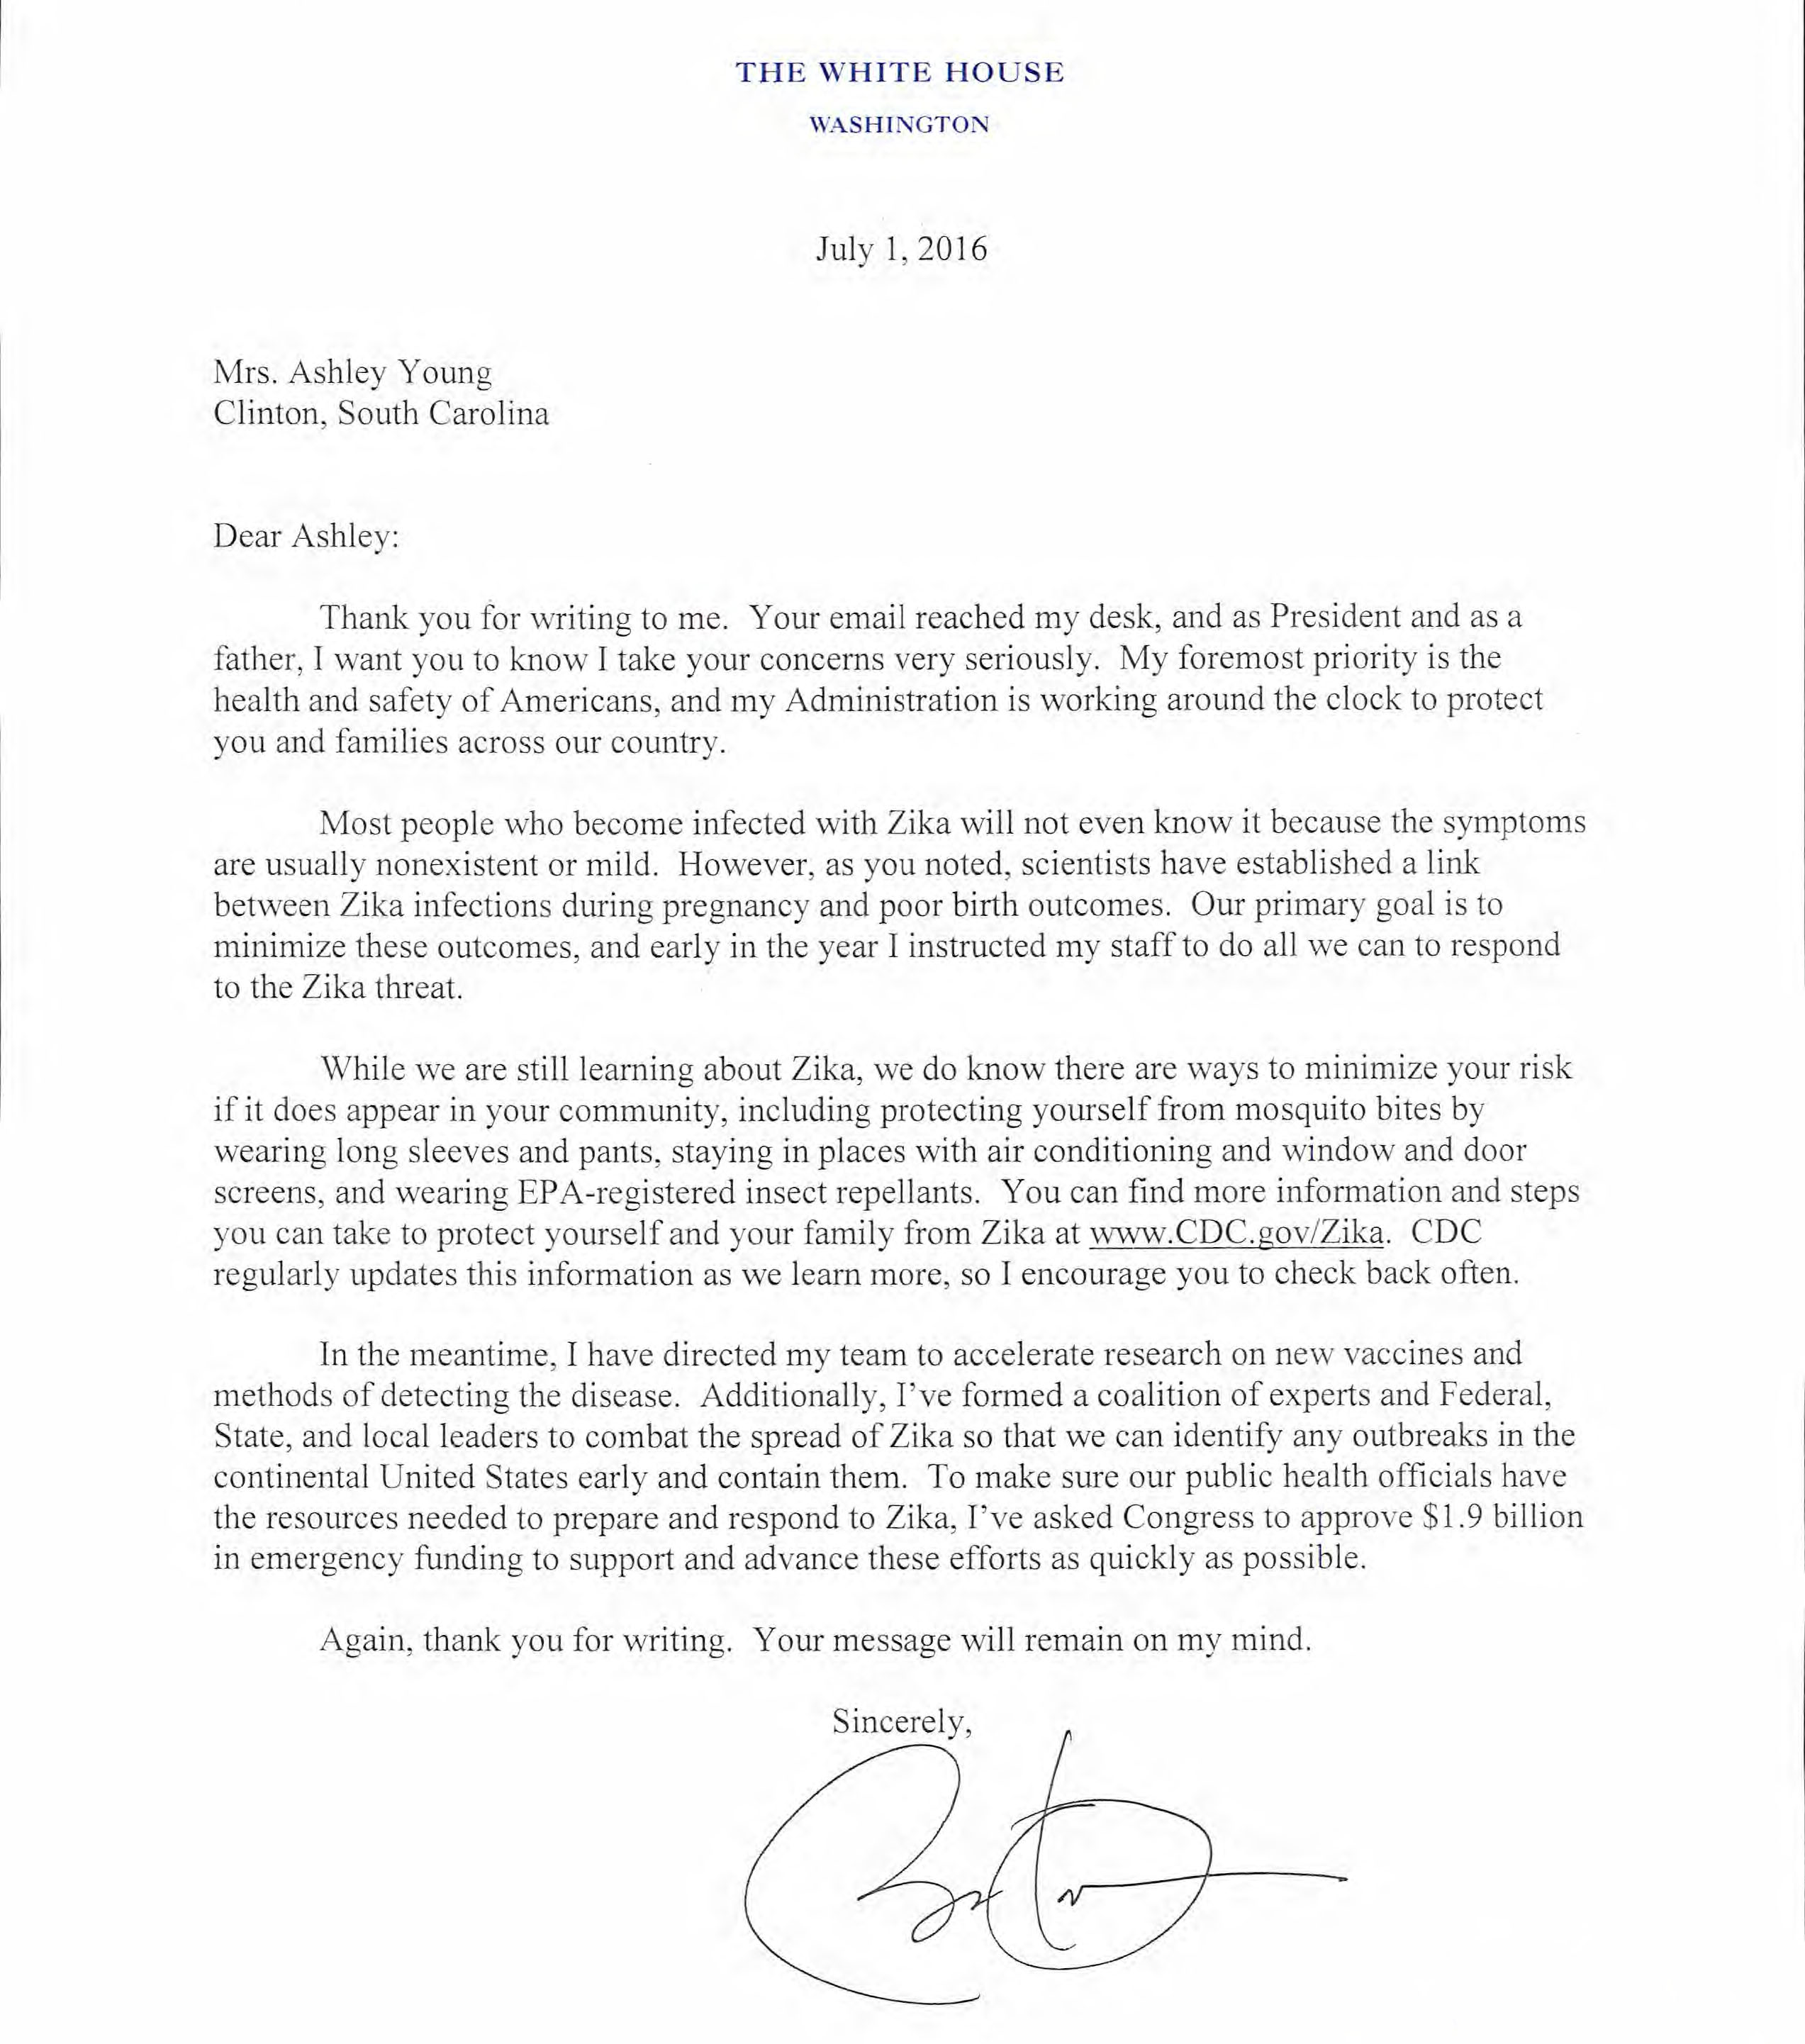 Asked And Answered President Obama S Letter To A Mother Concerned